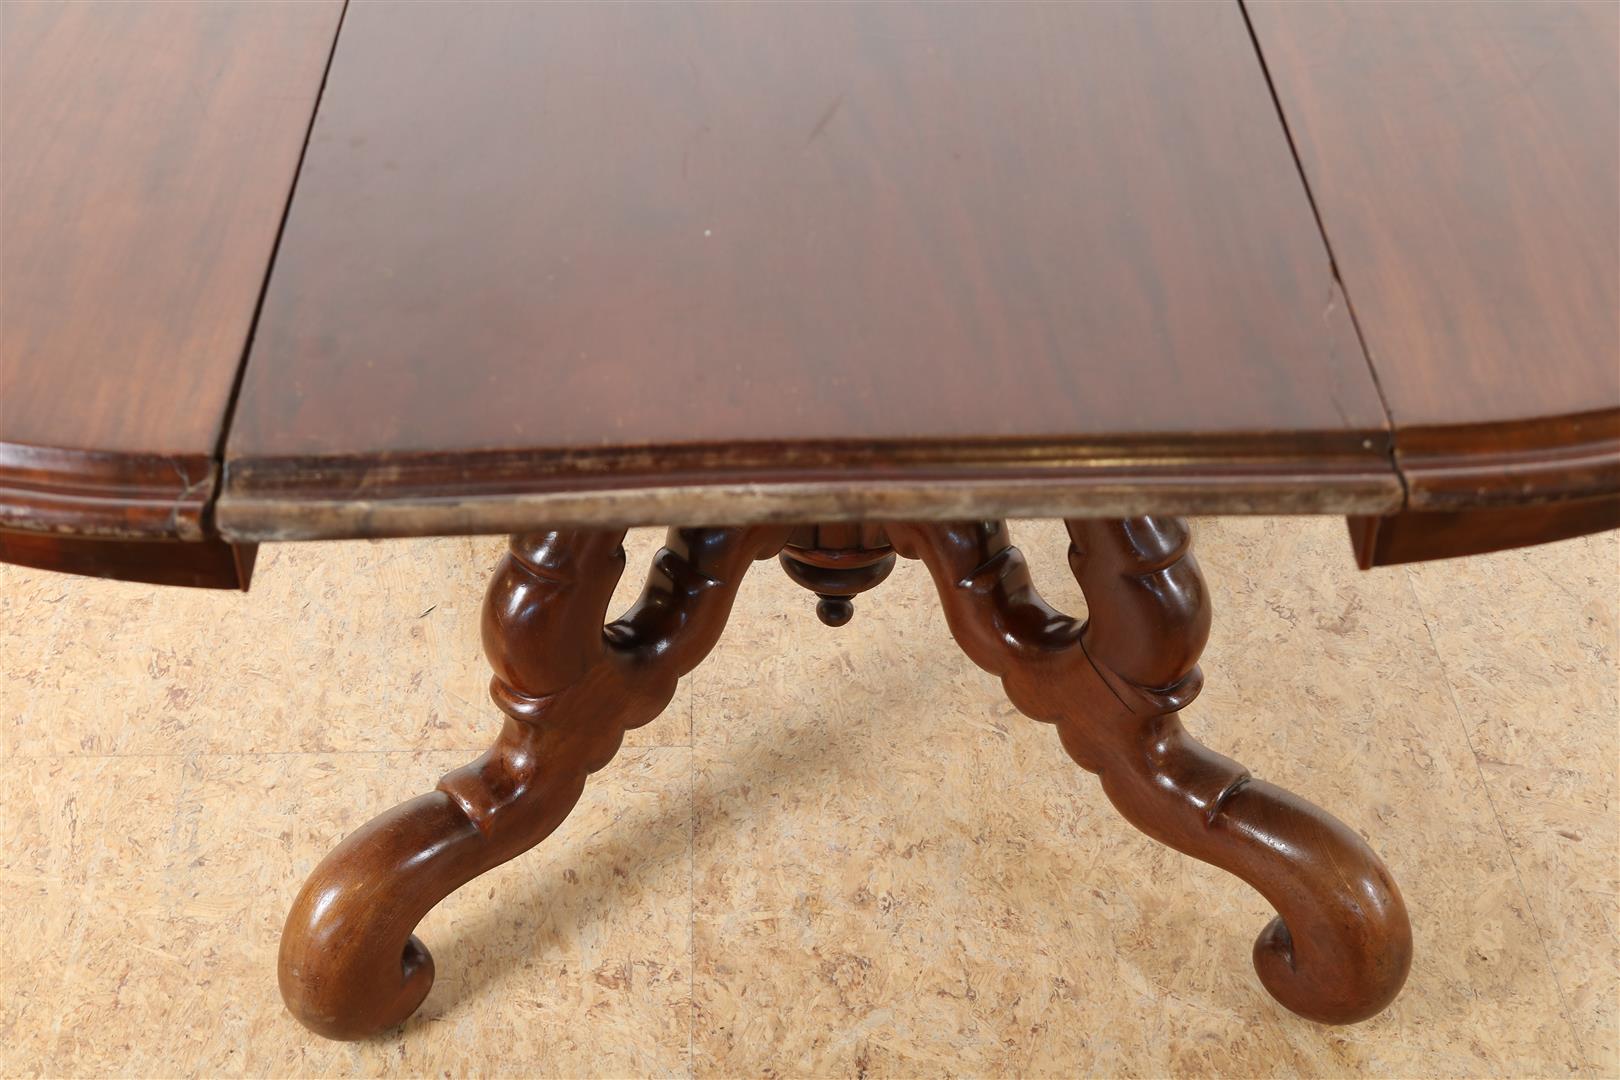 Mahogany Biedermeier coulisse table on spider head leg, 19 century, 74 x 135 x 108 cm, with - Image 7 of 7